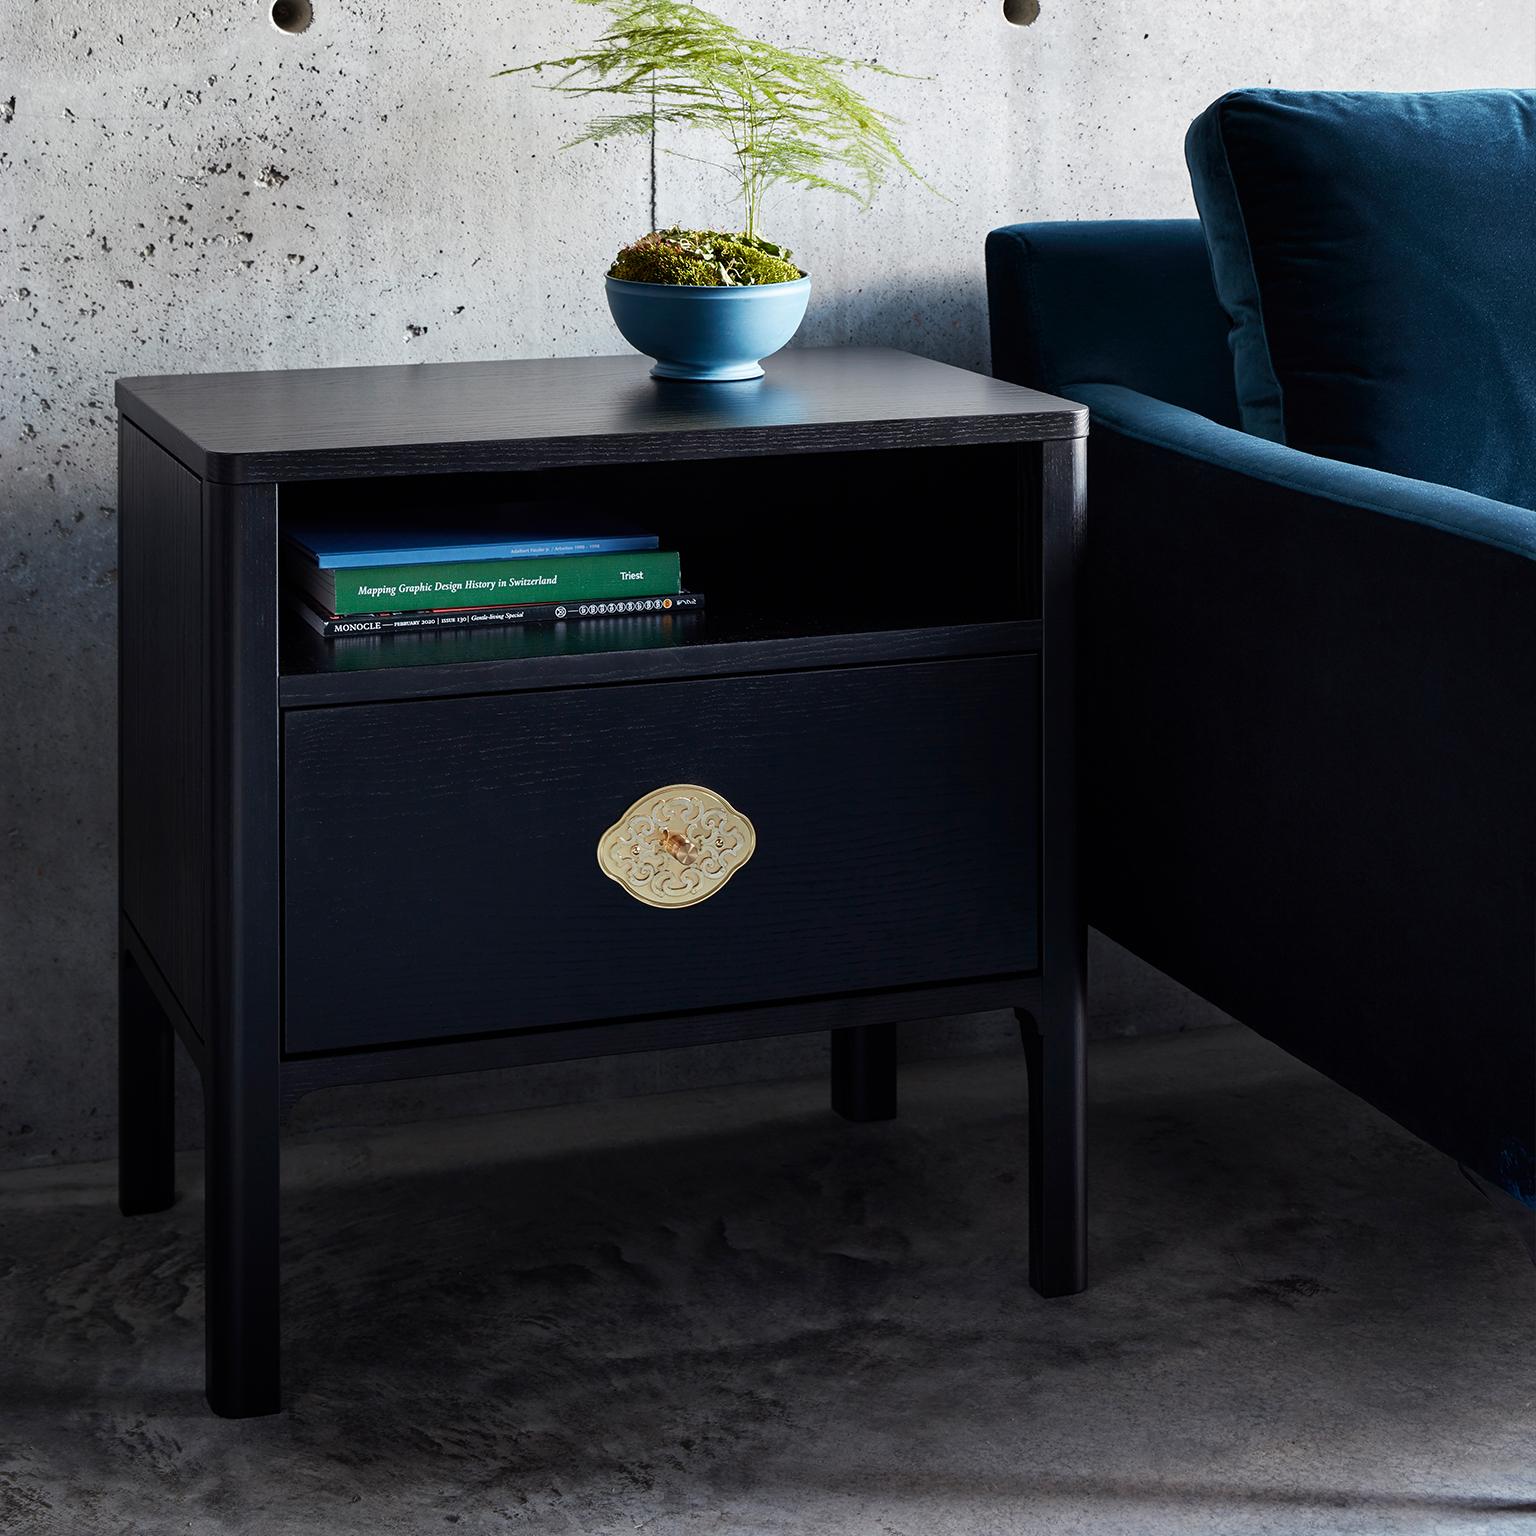 Keep your bedside light, alarm clock and a late-night snack close by with this Minimalist bedside table. An open shelf houses a convenient cord escape to make management easy and hide distractions when it’s time to say goodnight. The soft-closing